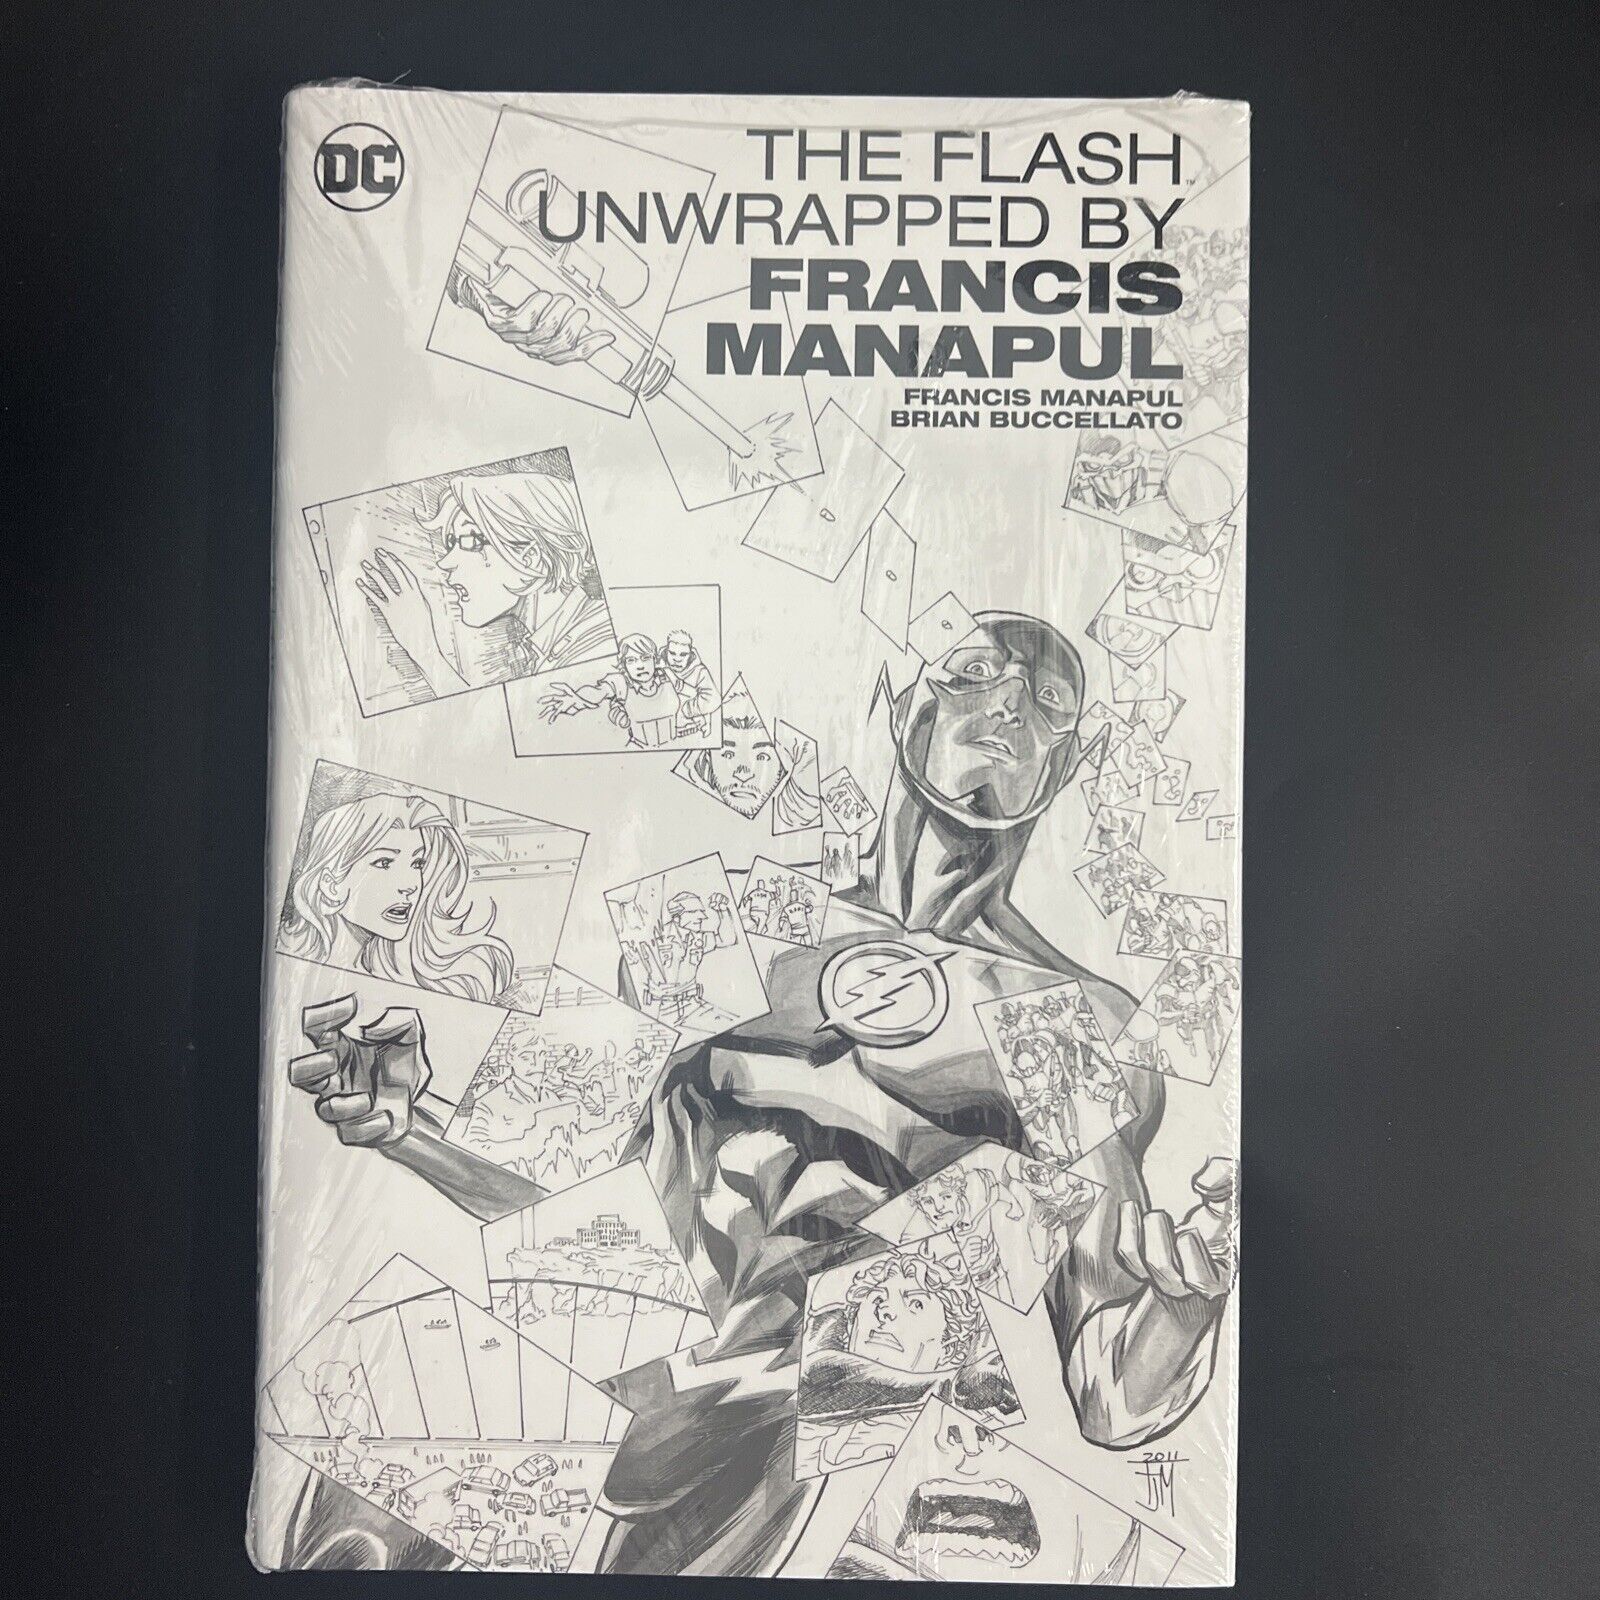 The Flash Unwrapped by Francis Manapul DC Comics September 2017 New In Plastic